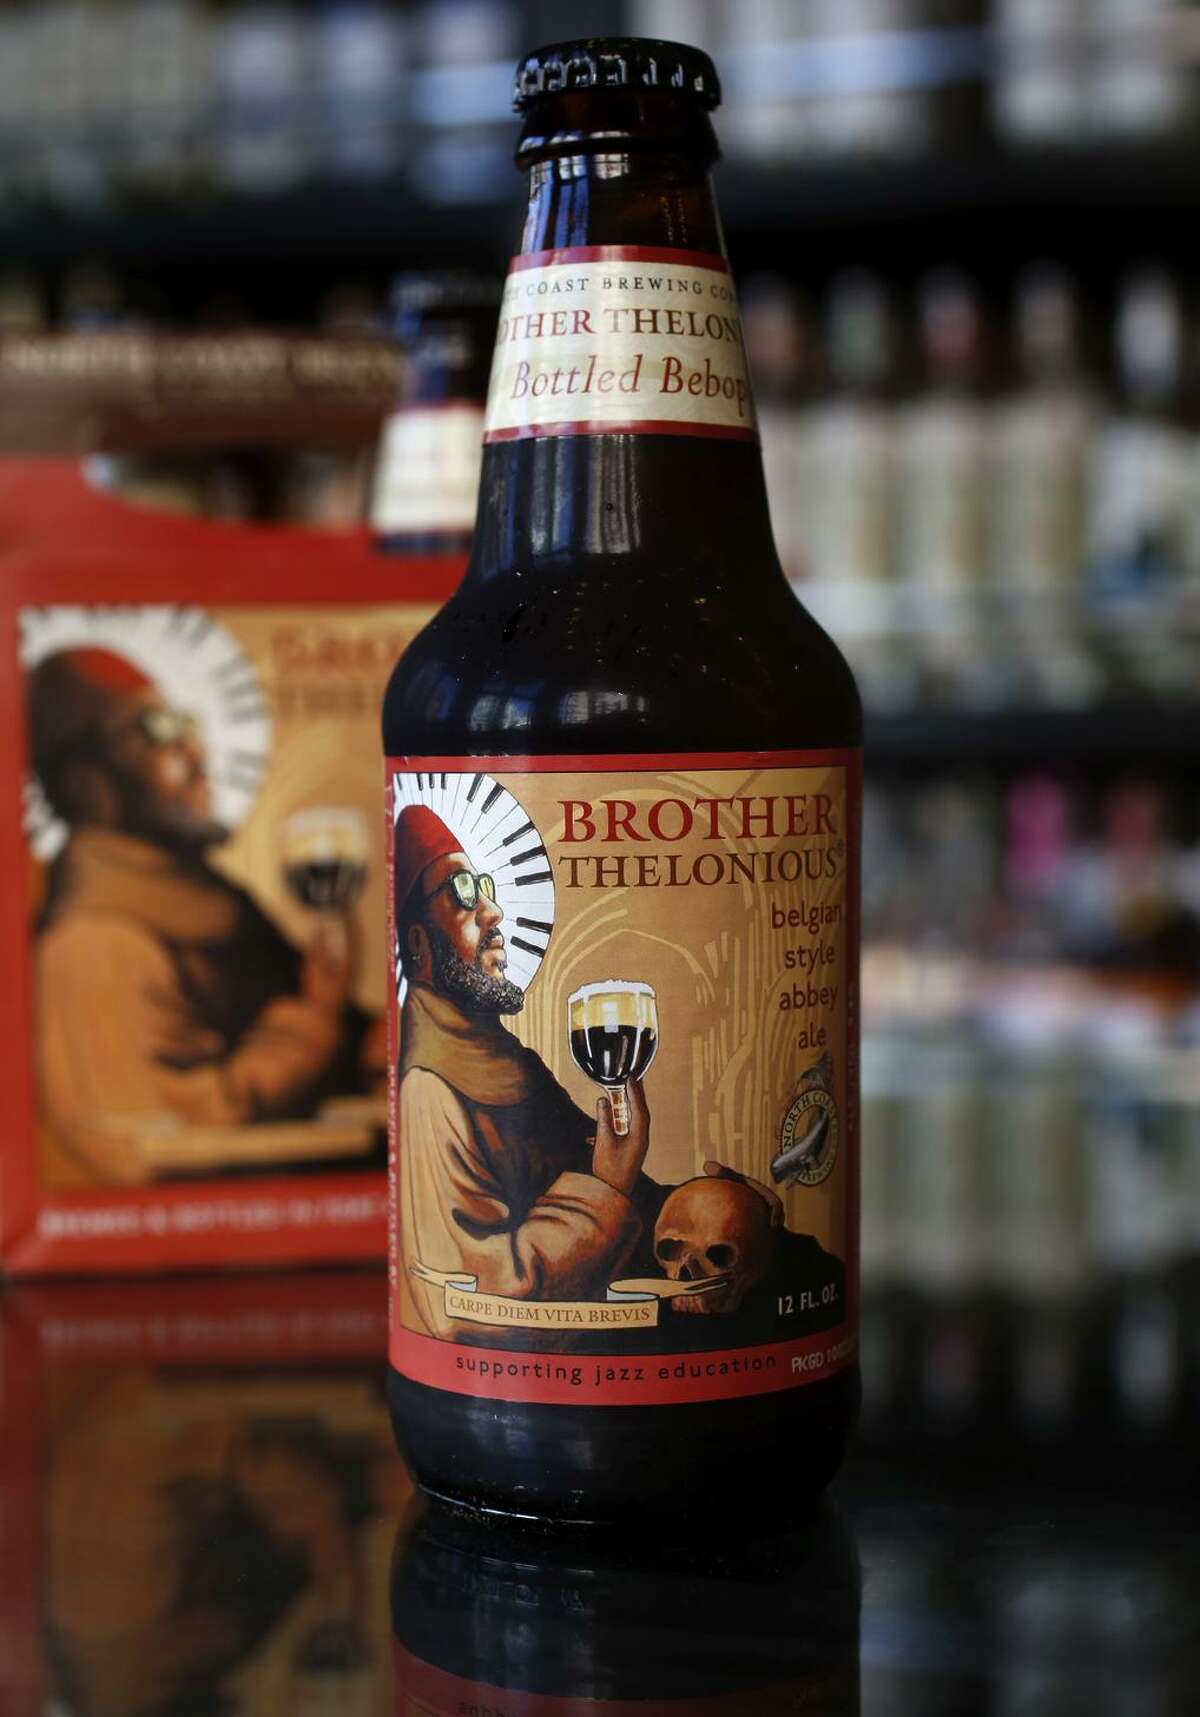 A bottle of “Brother Thelonious Belgian Style Abbey Ale,” with a label showing Thelonious Monk in his trademark cap and sunglasses.